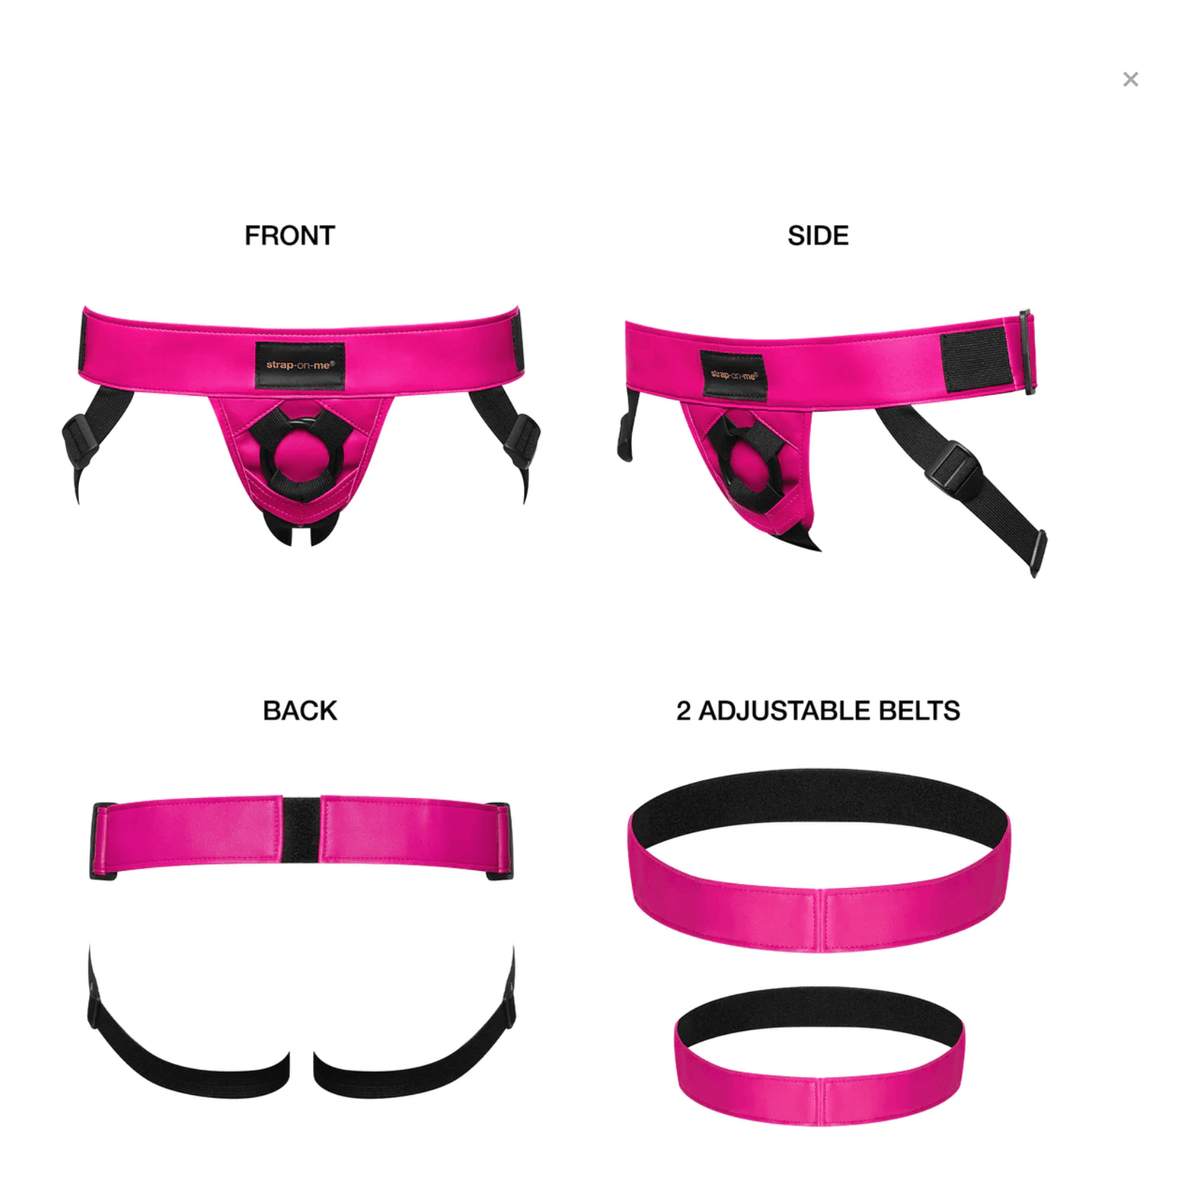 Strap-On-Me Curious Leatherette Harness - Fuchsia - shop enby